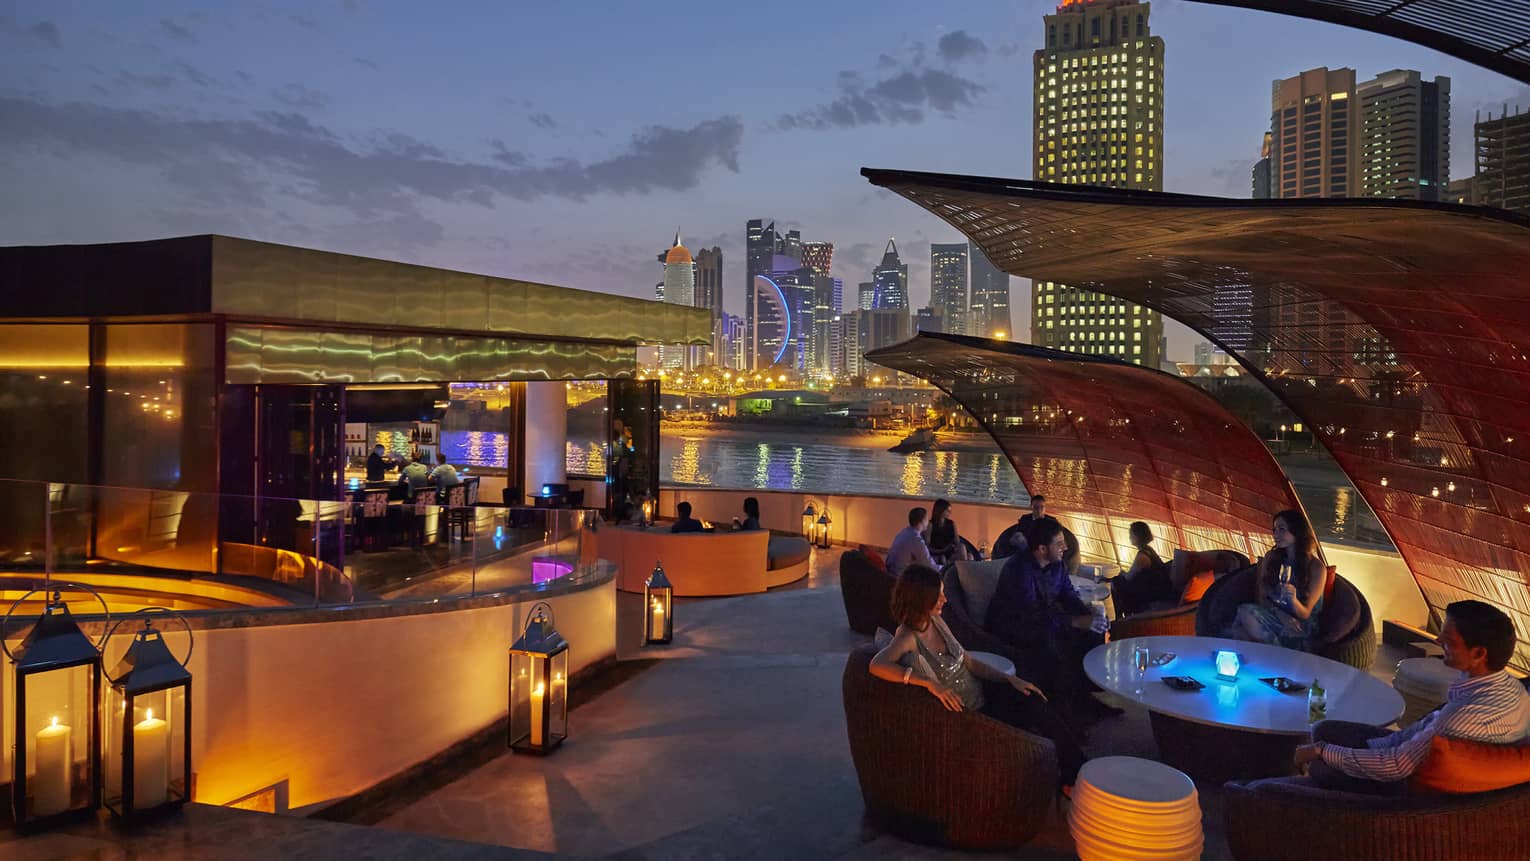 Nobu Doha patio at night with glowing lanterns around bar, table, city skyline in background